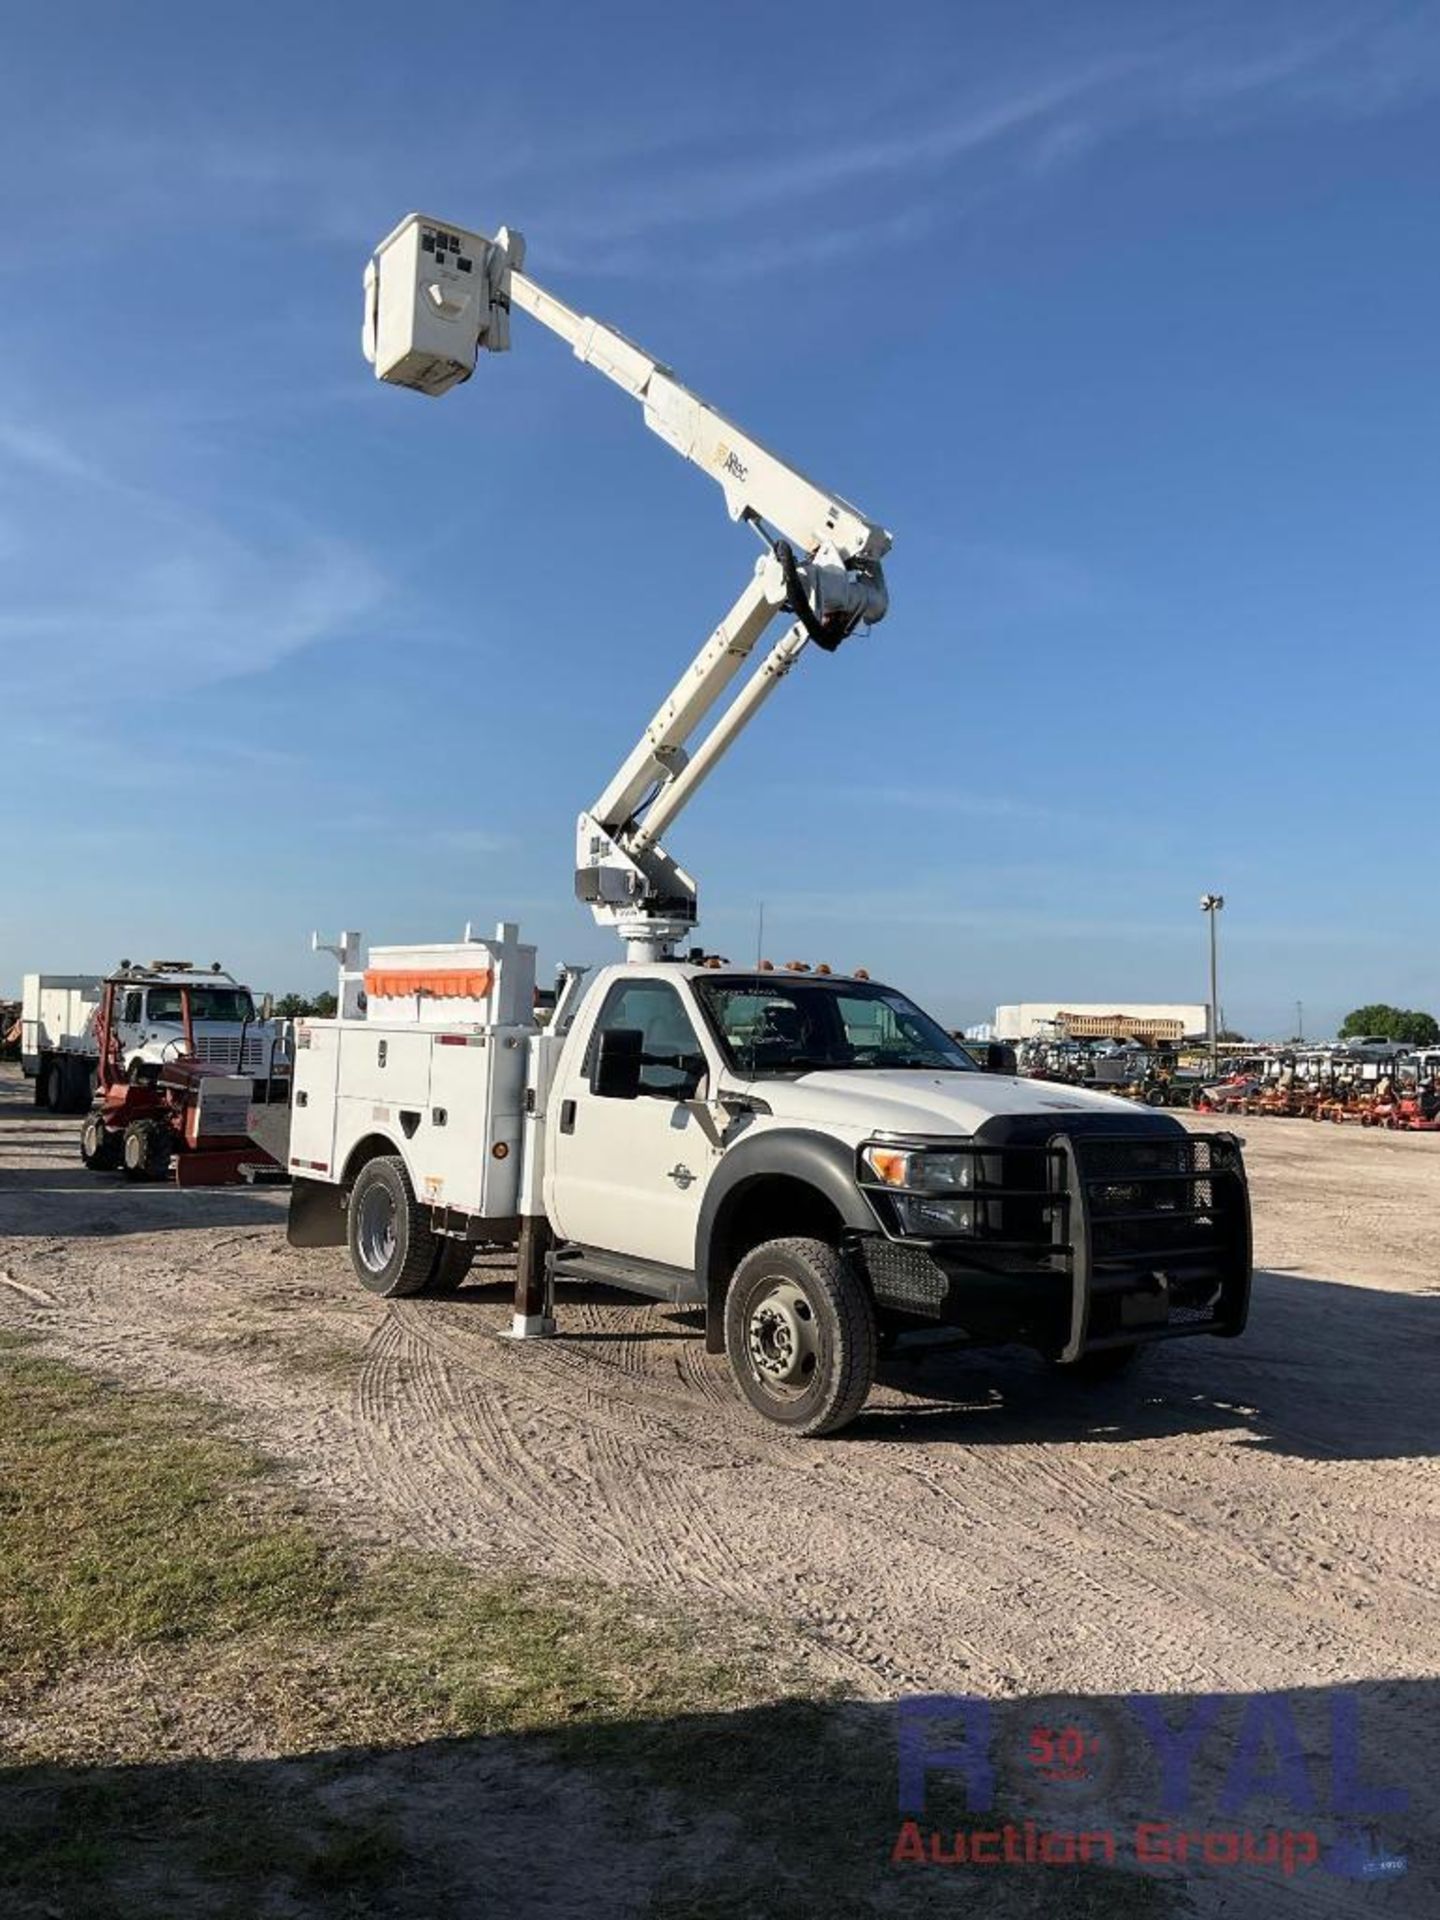 2012 Ford F550 4x4 Bucket Truck - Image 2 of 32